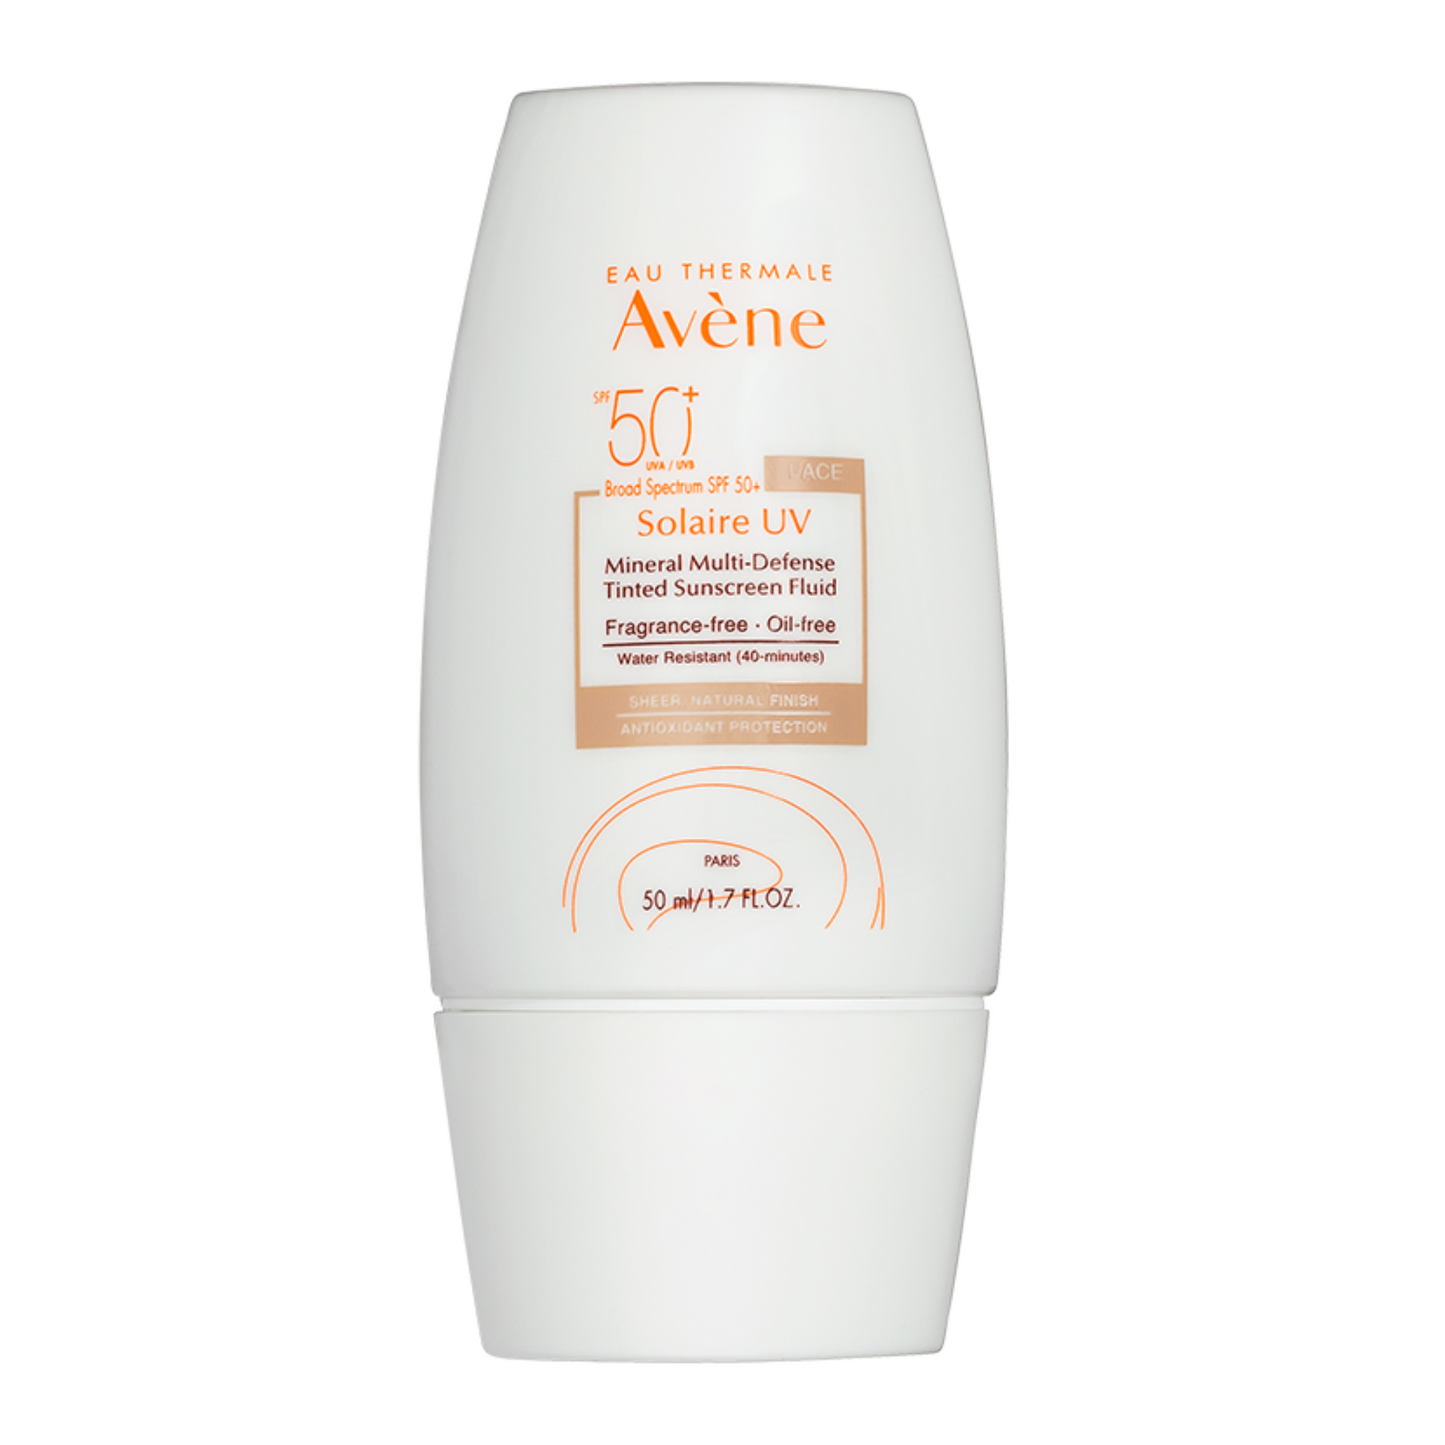 Primary image of Eau Thermale Avene SolaireUV Tinted Mineral Multi-Defense Sunscreen SPF 50+